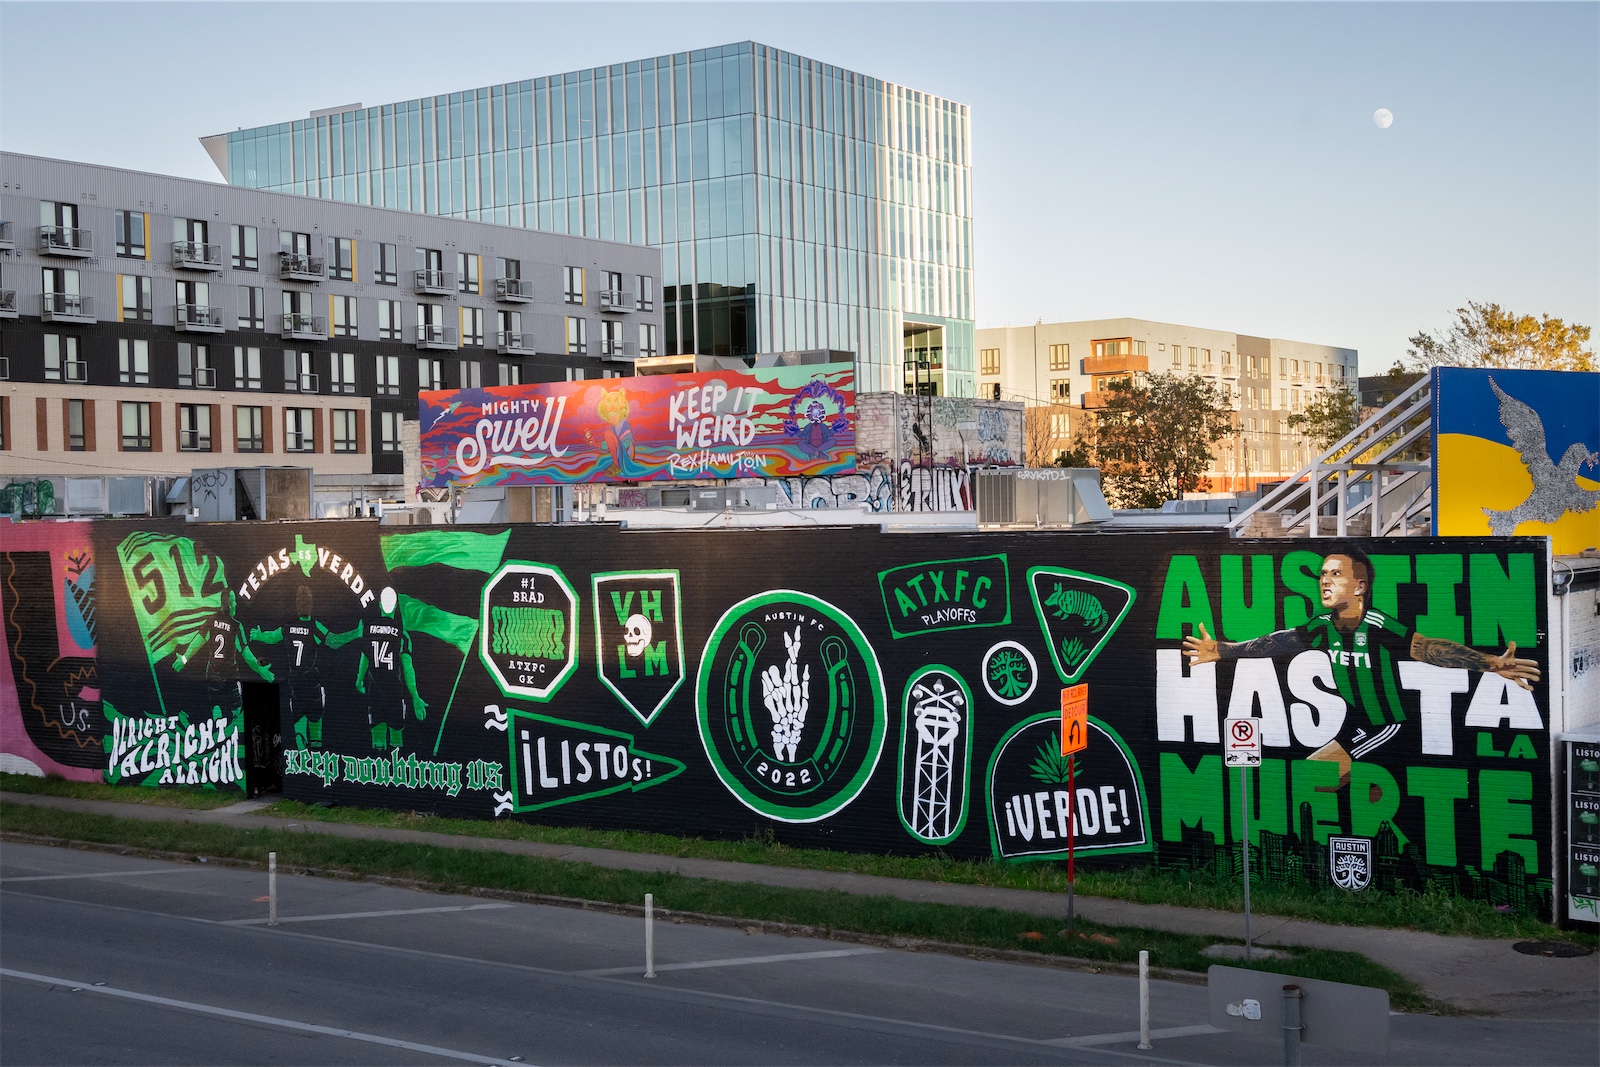 The full Austin FC panorama, viewed at an angle with buildings and sky in the background